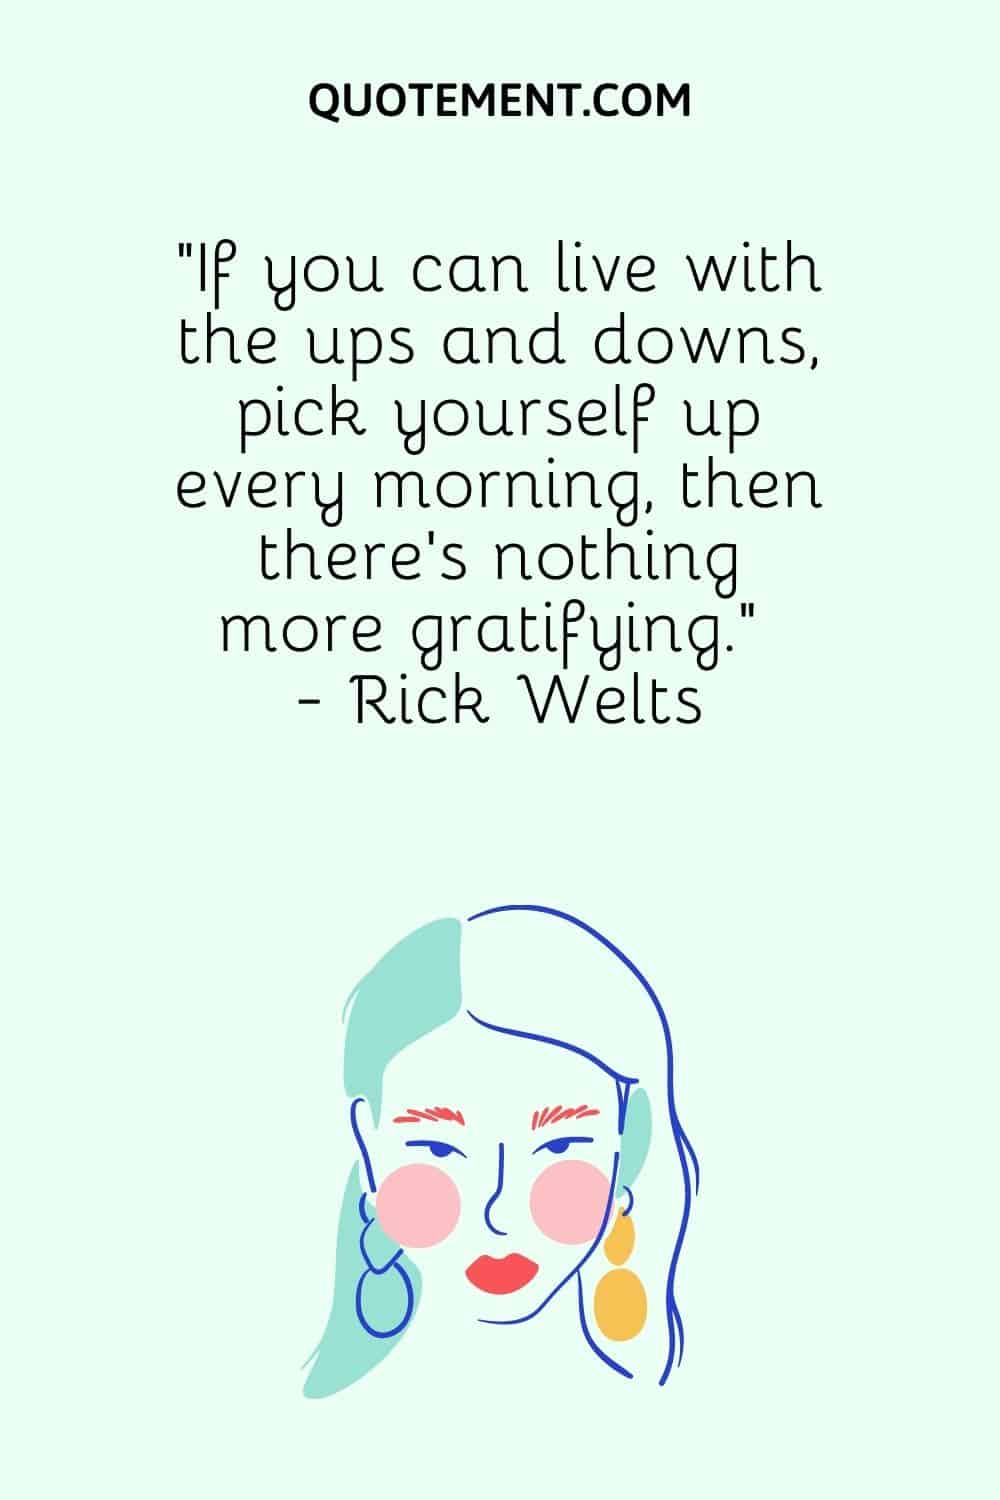 “If you can live with the ups and downs, pick yourself up every morning, then there's nothing more gratifying.” - Rick Welts